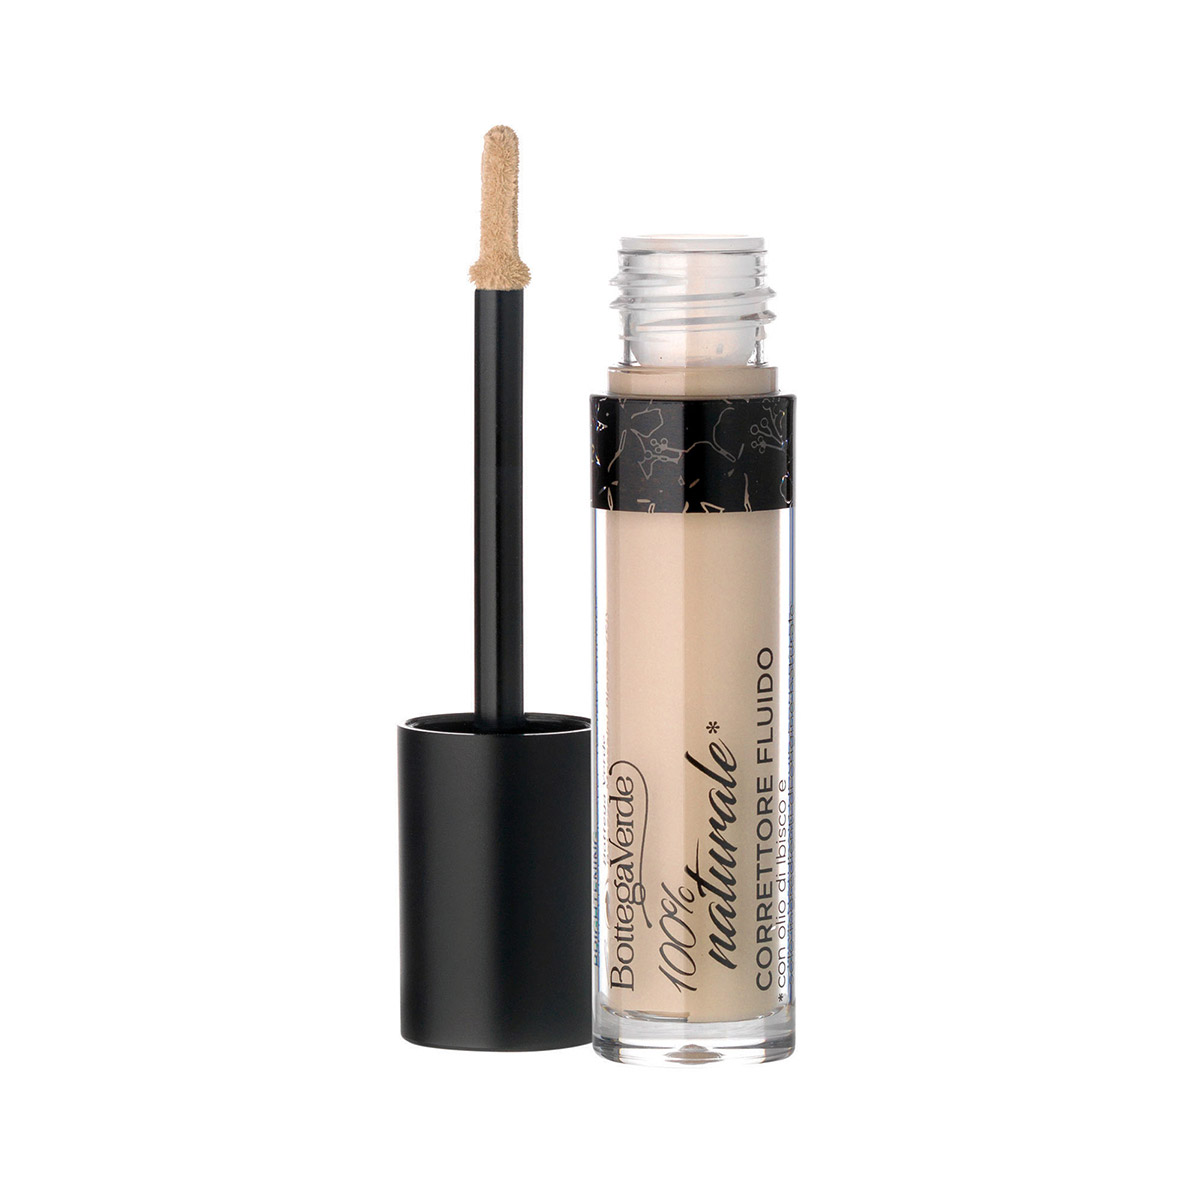 100% Natural* - Liquid Concealer *with Hibiscus Oil and only ingredients of natural origin - Brightening